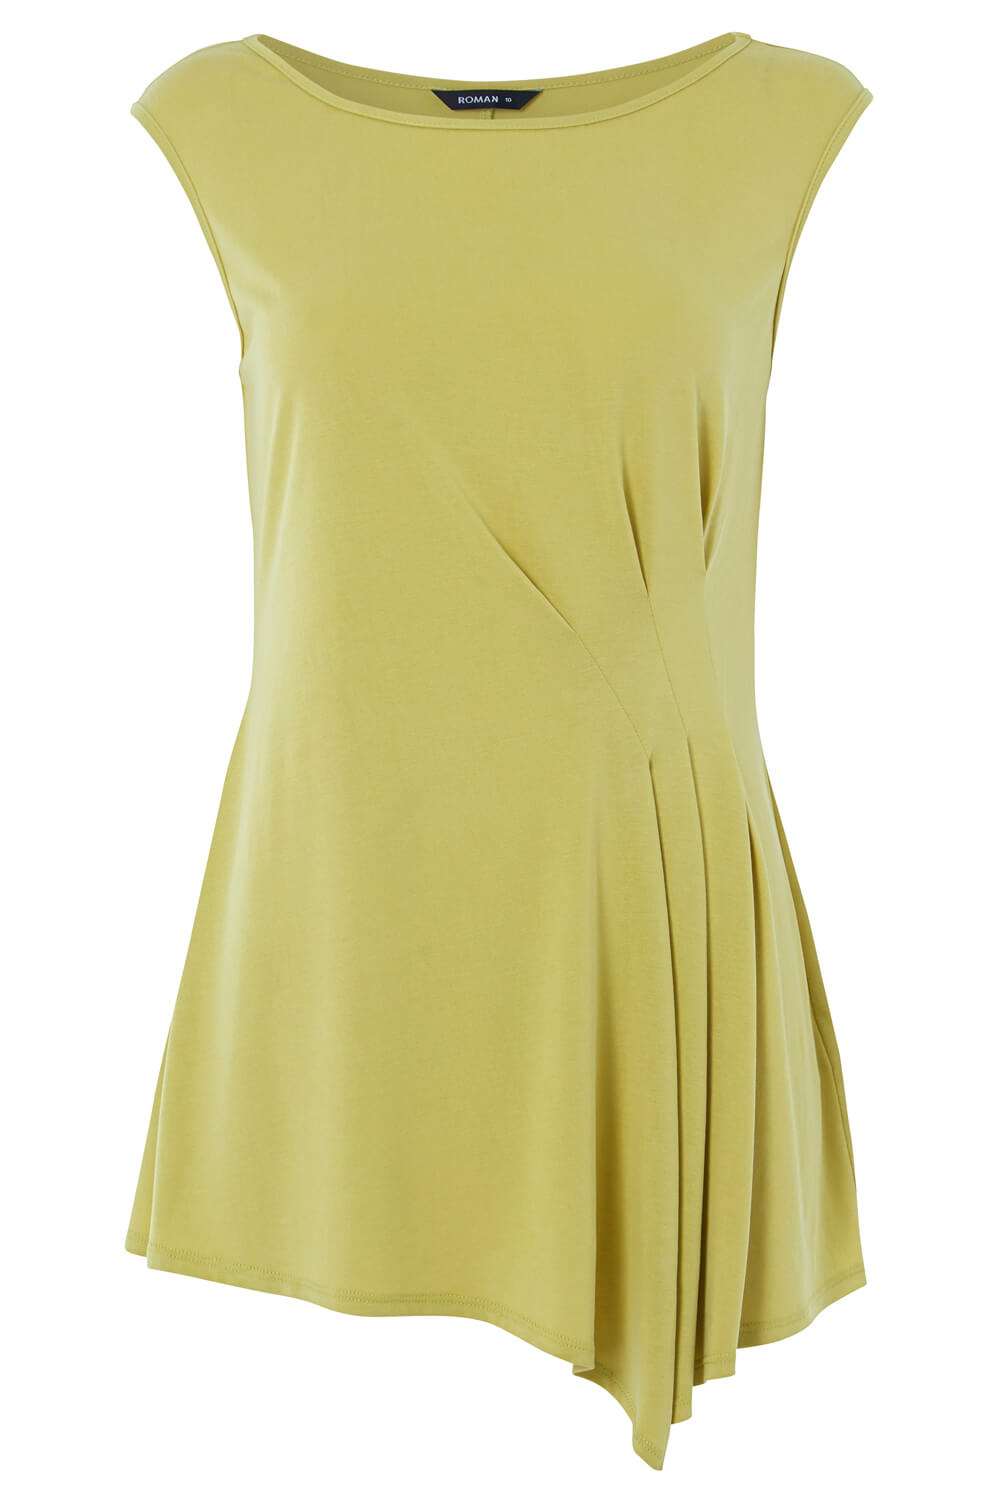 Lime Asymmetrical Pleat Detail Top, Image 5 of 5